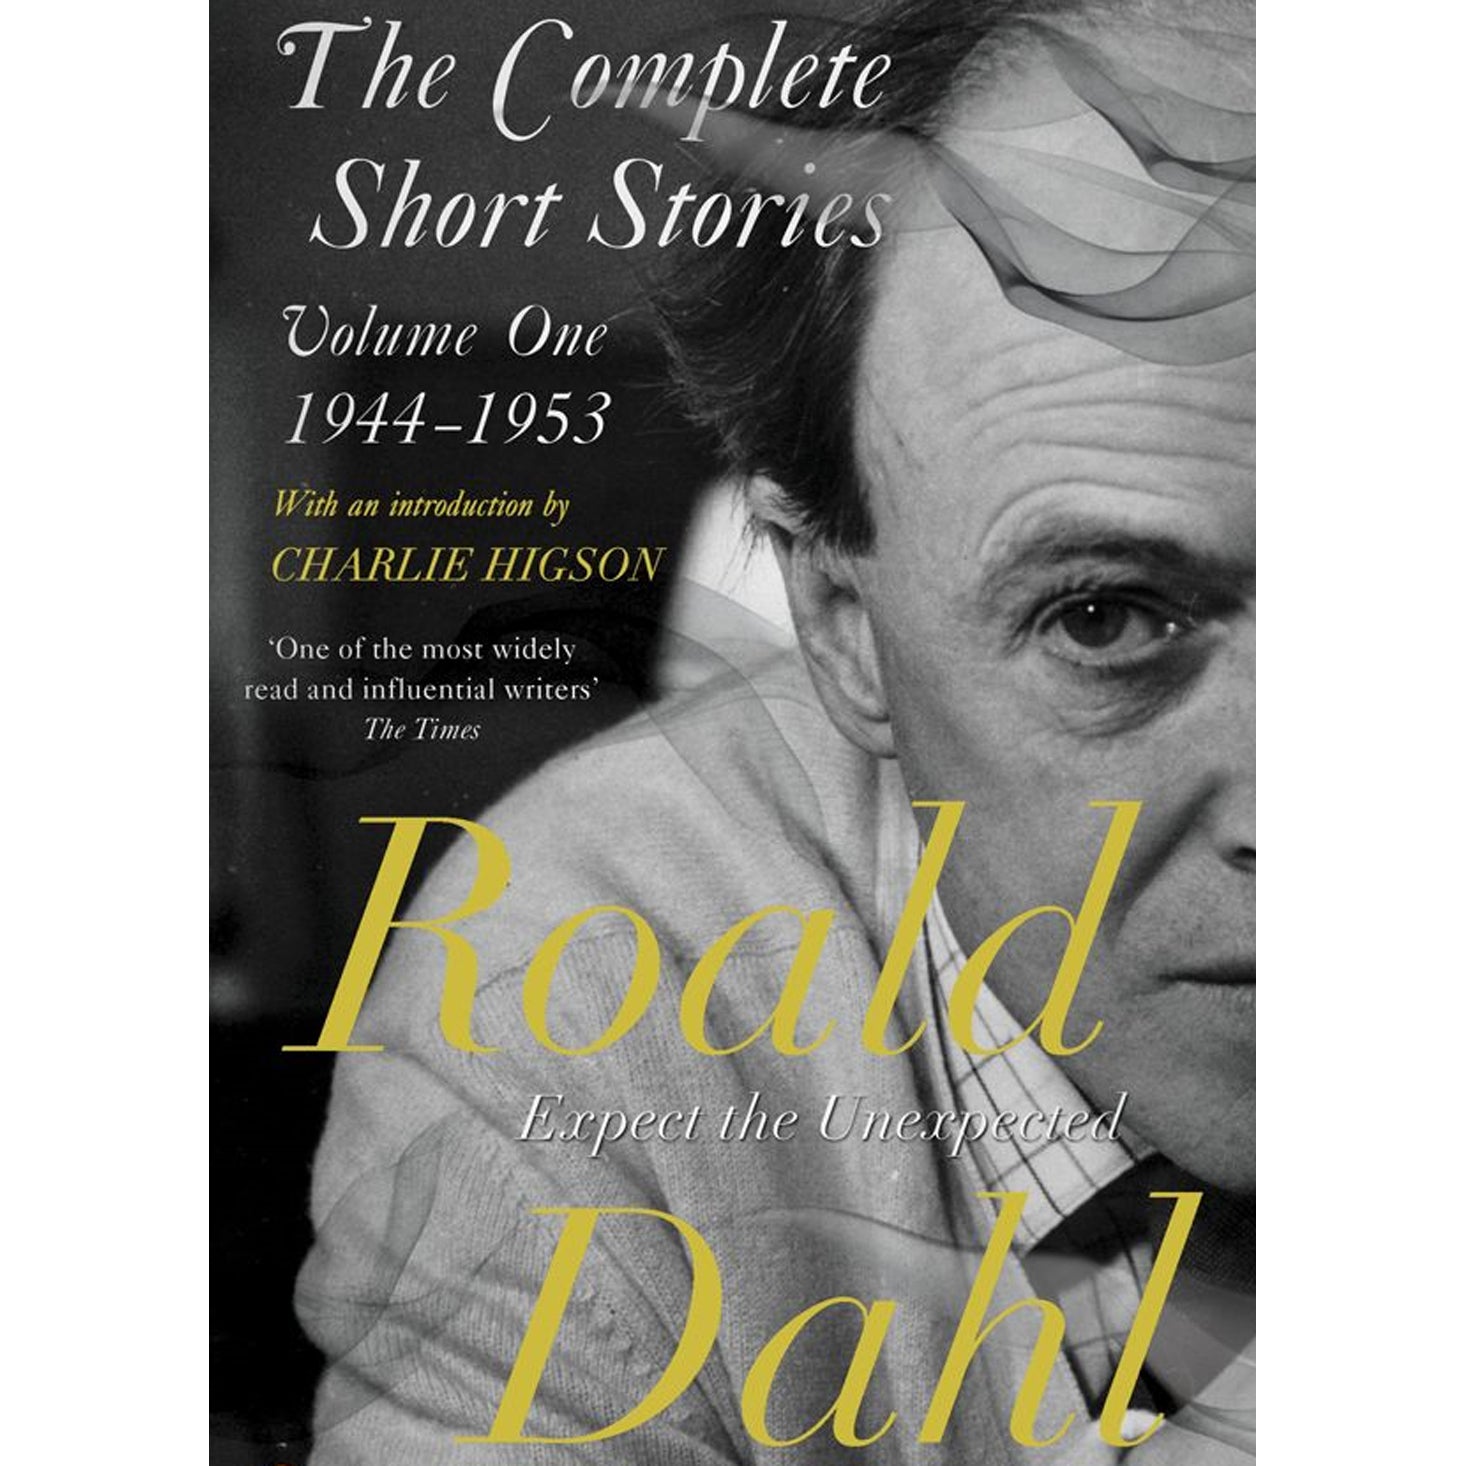 The Complete Short Stories Volume One by Roald Dahl